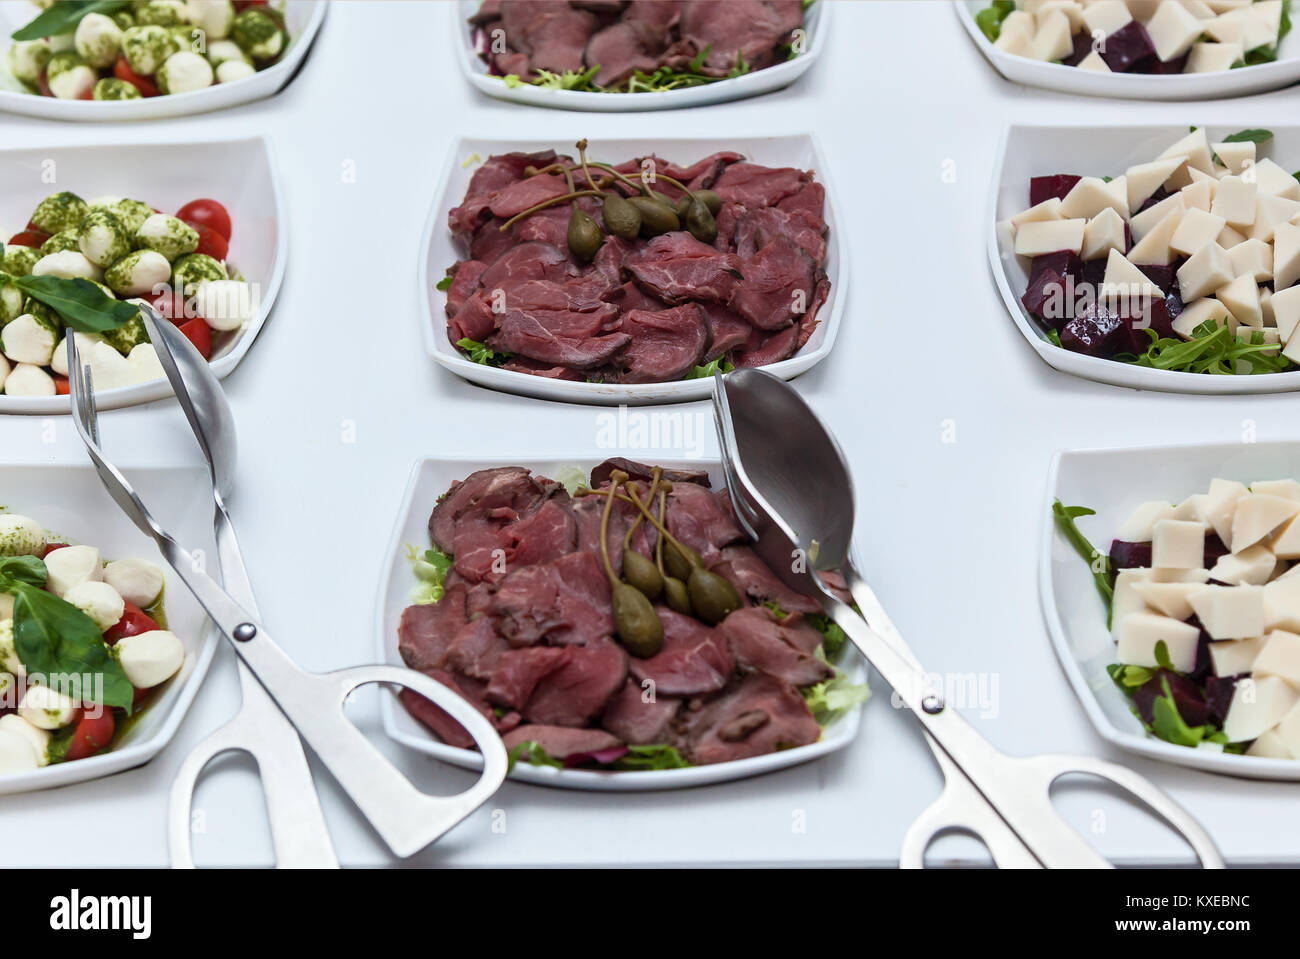 Plate of cold cuts with capers. Sliced meats in a white plate with capers on a white table. Meat with capers Stock Photo